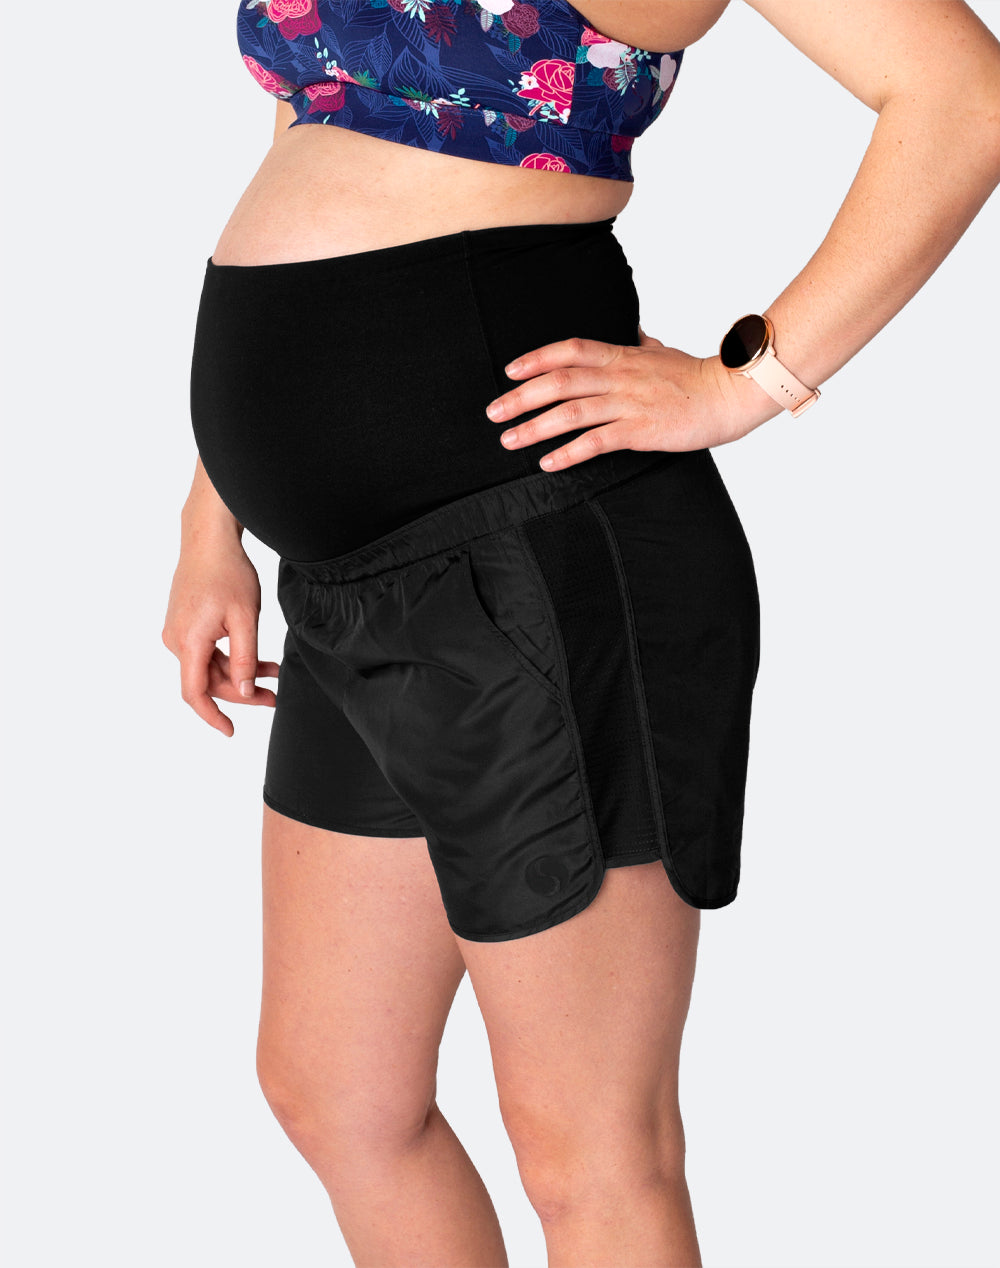 Flex Shorts | Maternity Running Shorts | Black - Nest and Sprout Maternity